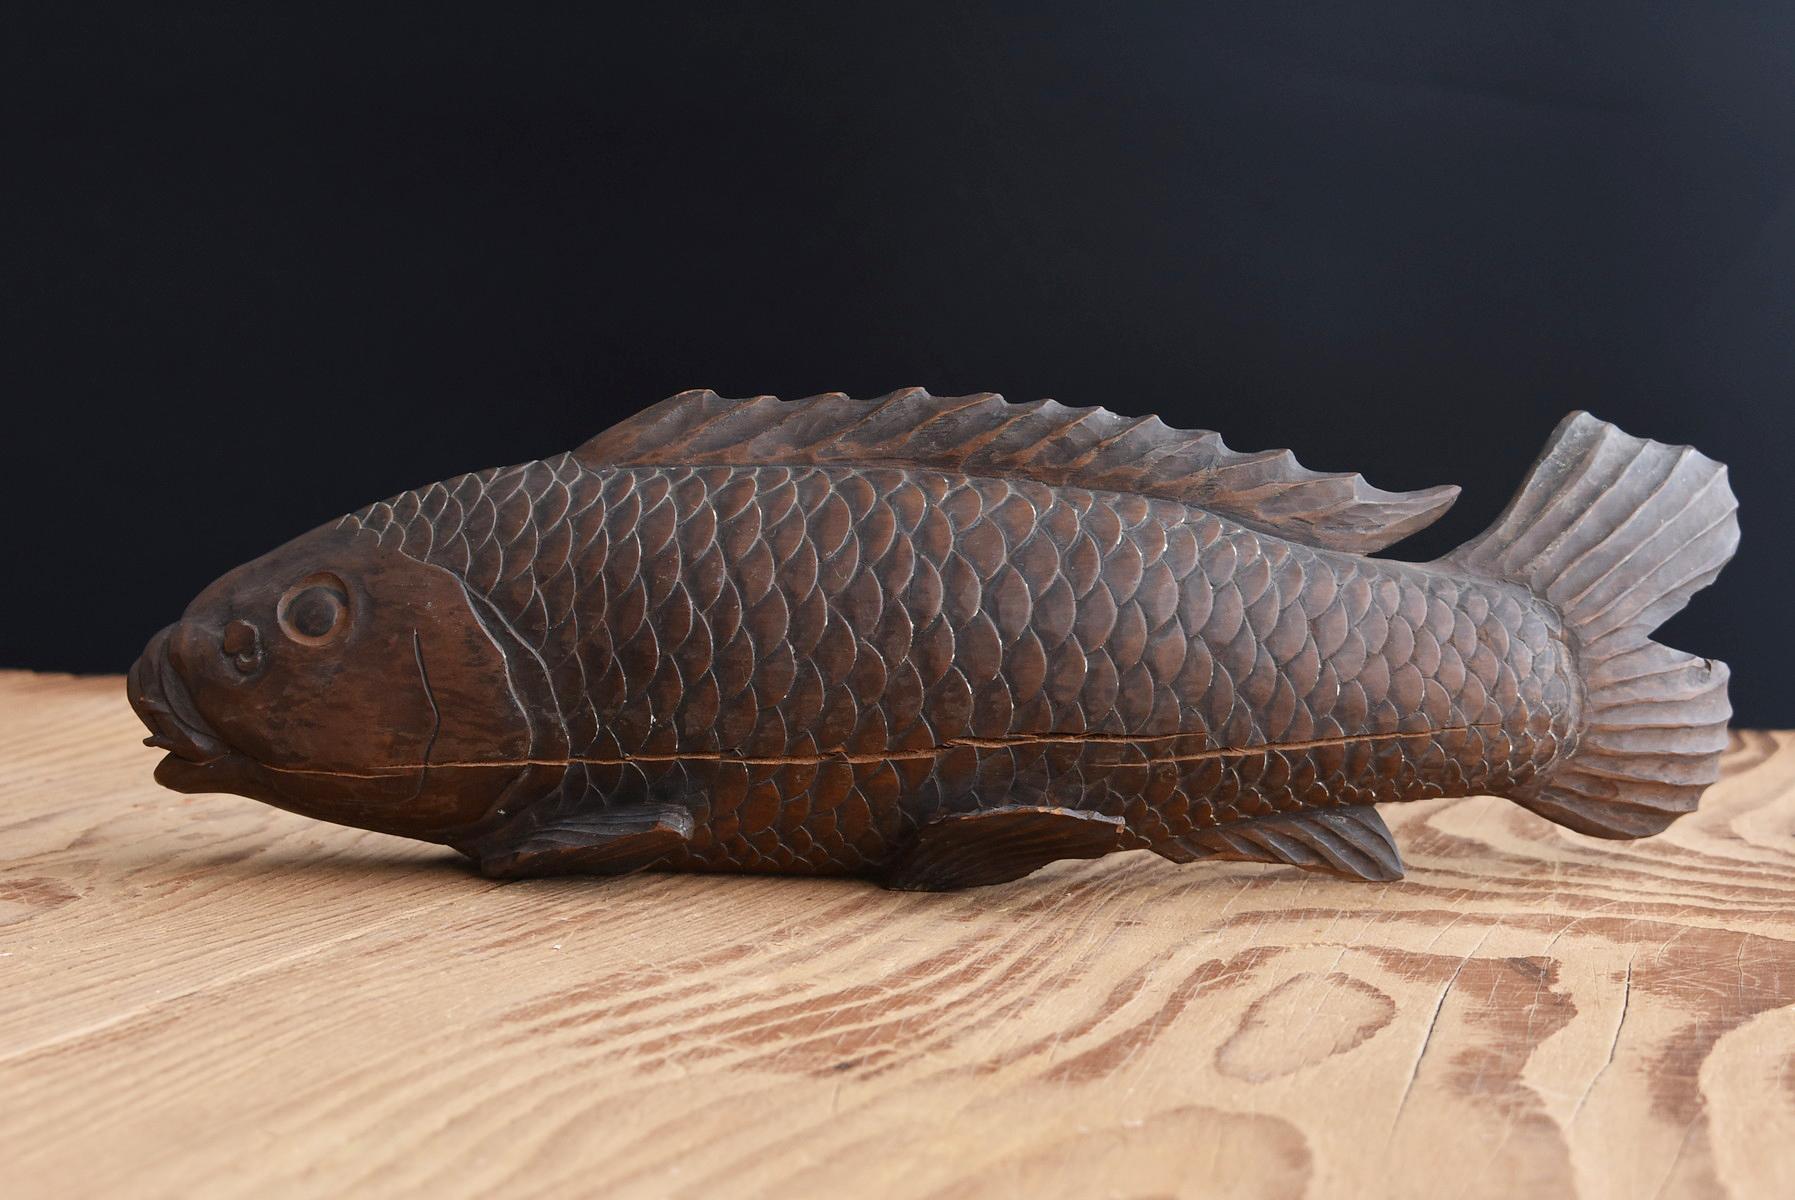 19th Century Japanese Old Wooden Carp Figurine/Excellent Skillful Carving/Meiji, Showa Era